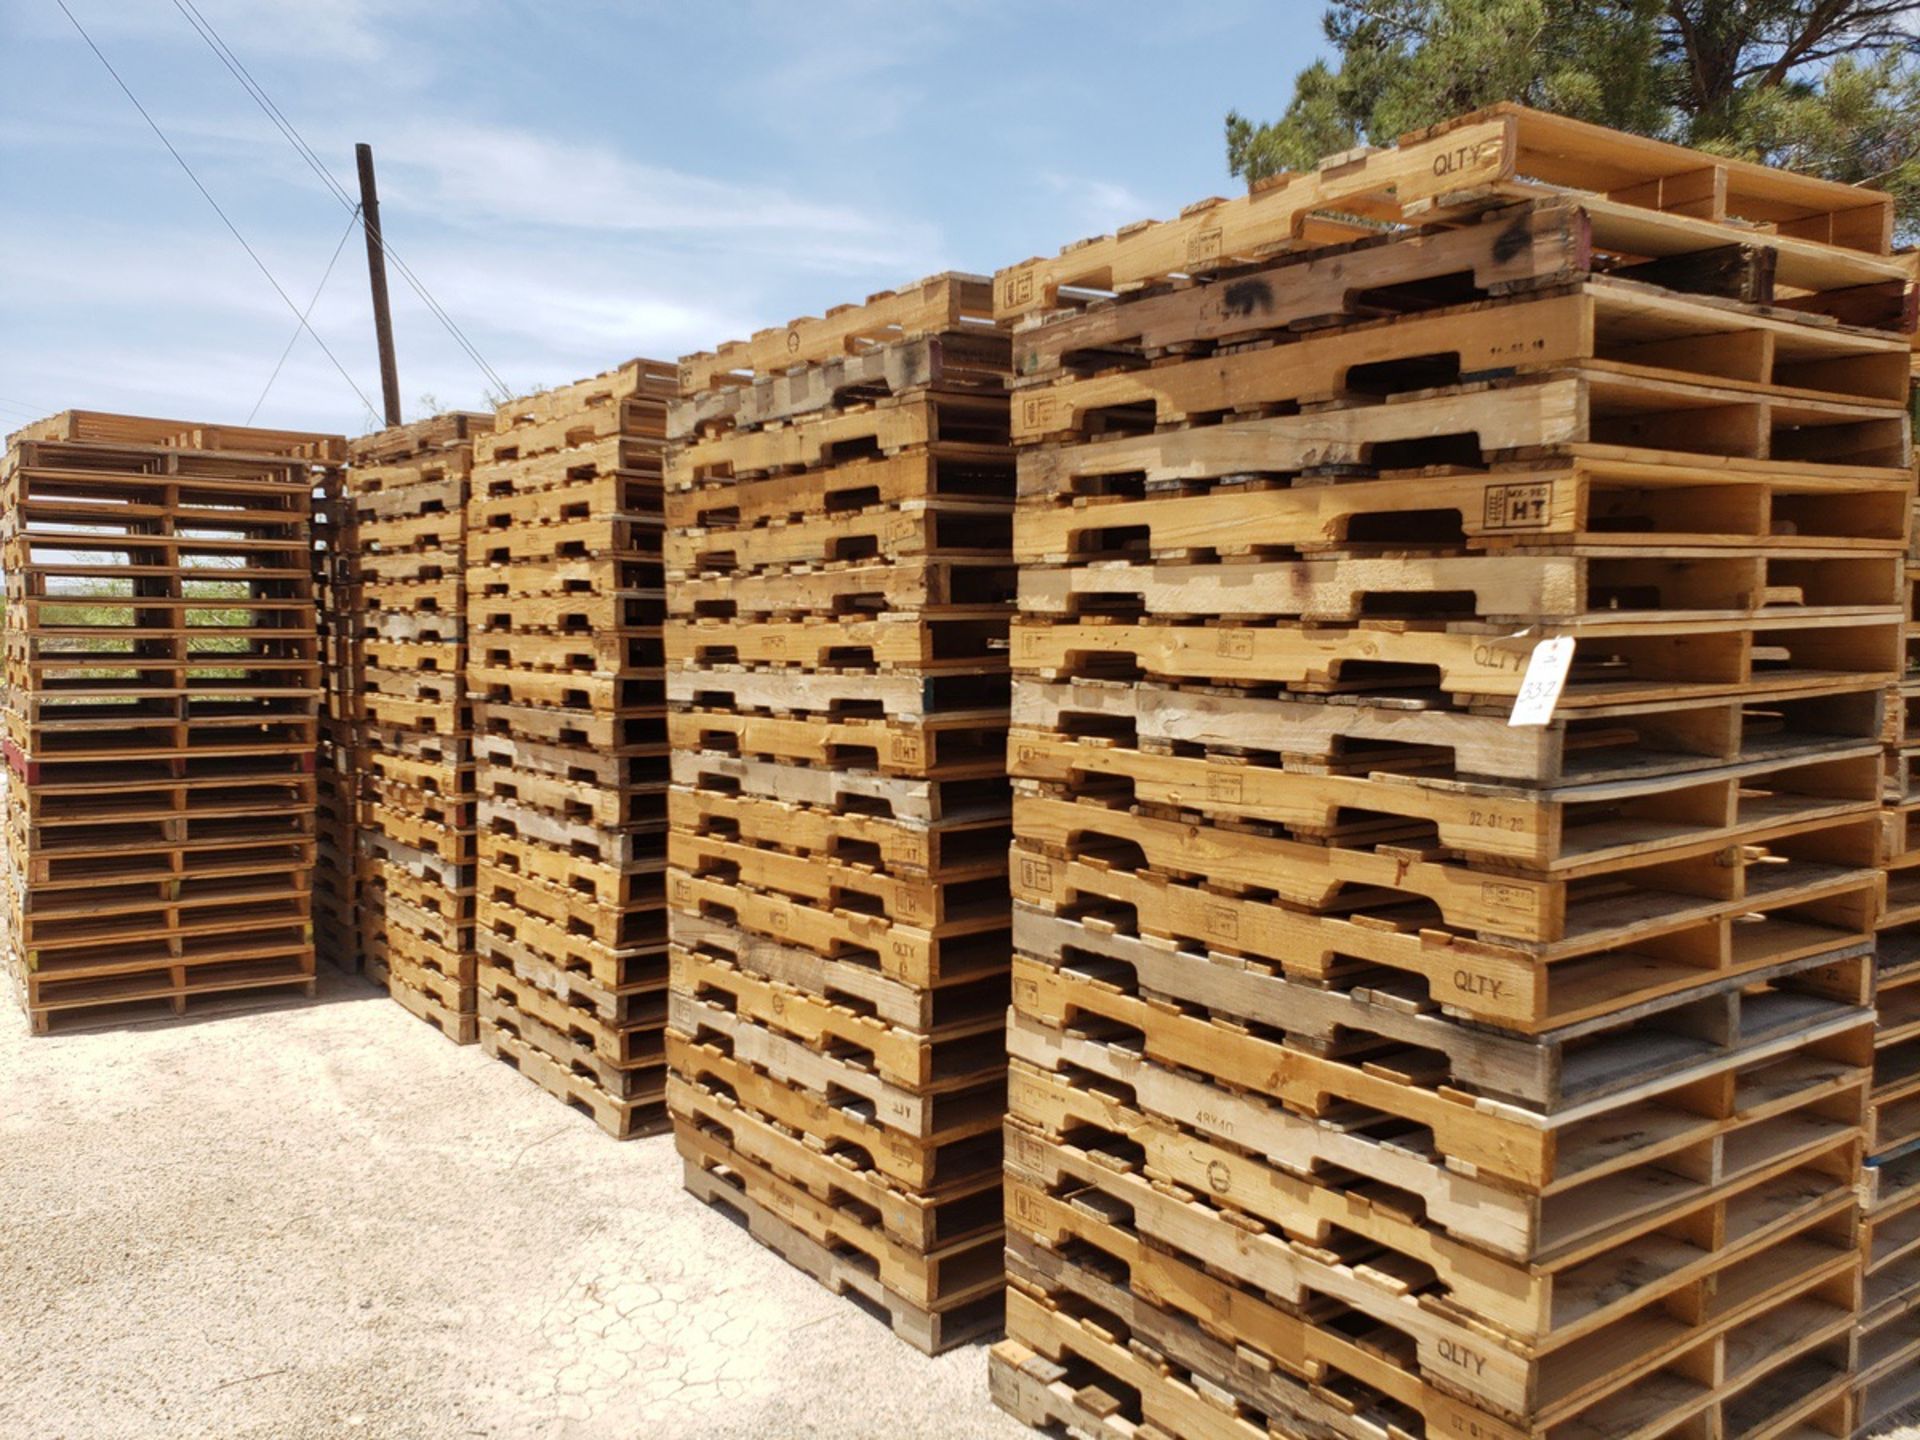 Lot of (220) 42" X 48" Heat Treated Pallets | Rig Fee $200